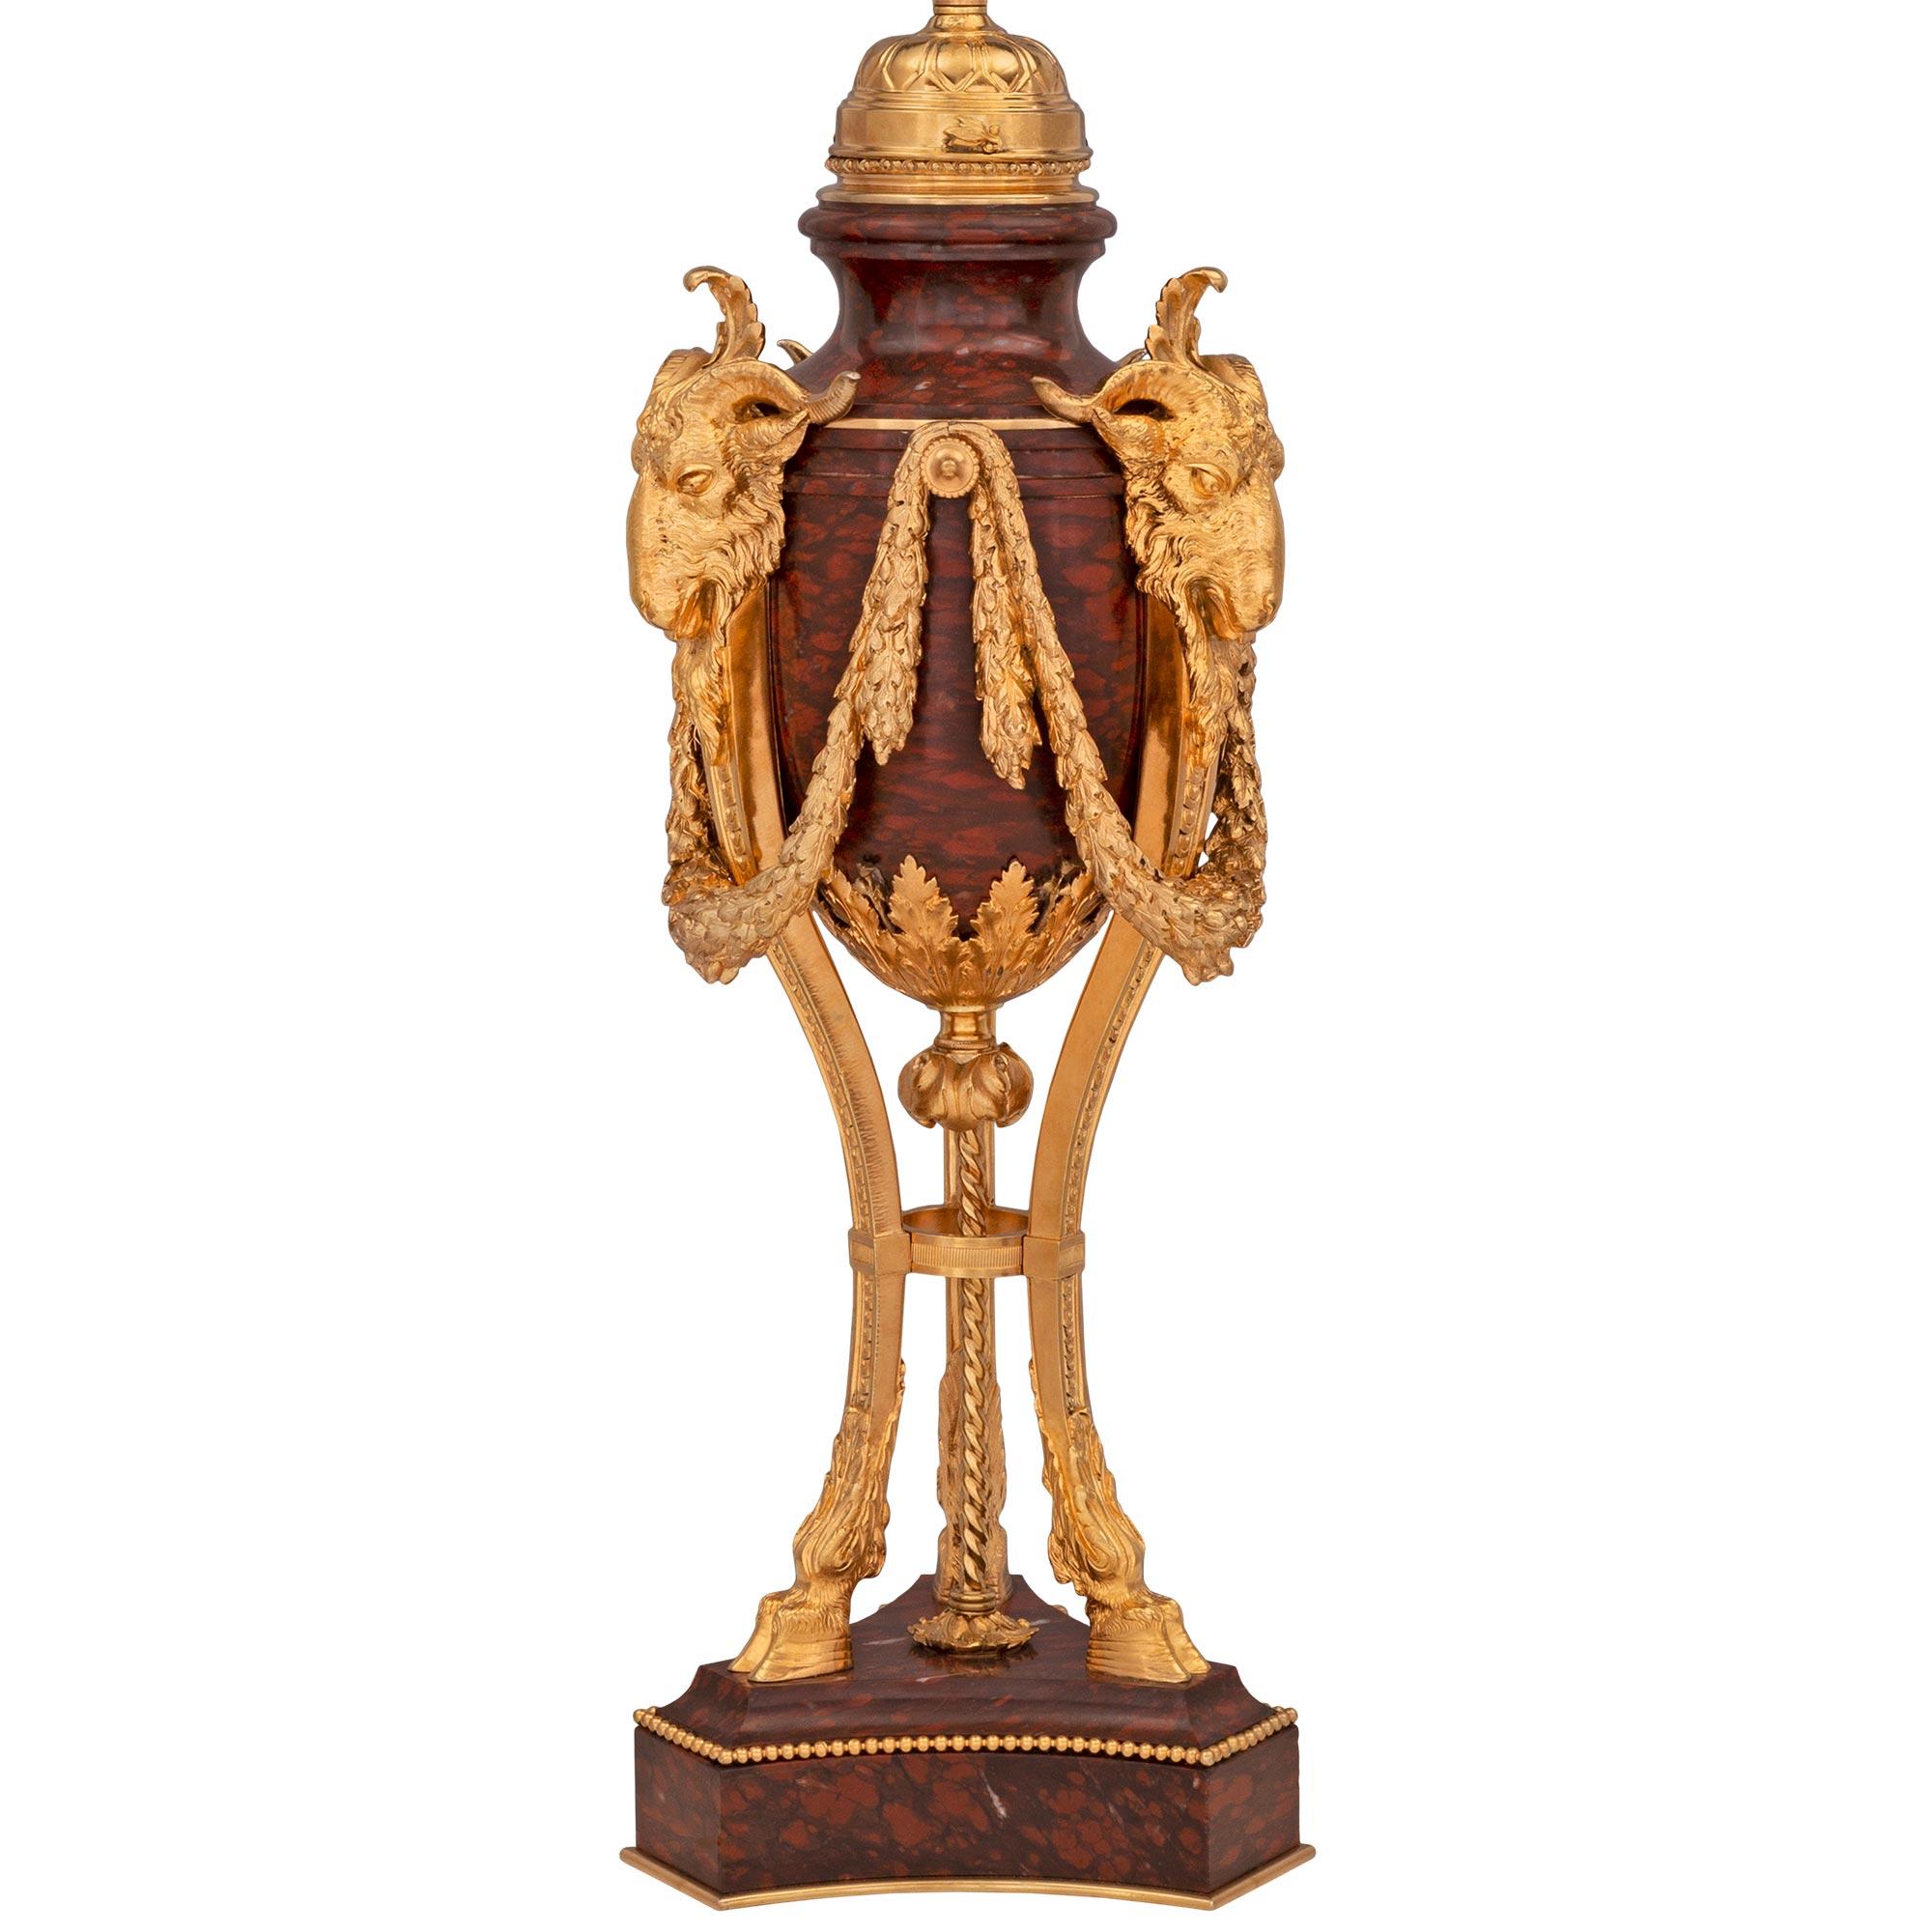 A stunning and extremely high quality French 19th century Louis XVI st. Belle Époque period ormolu and Rouge Griotte marble lamp. The elegant lamp is raised by a triangular Rouge Griotte marble base with fine concave sides and a mottled border. At